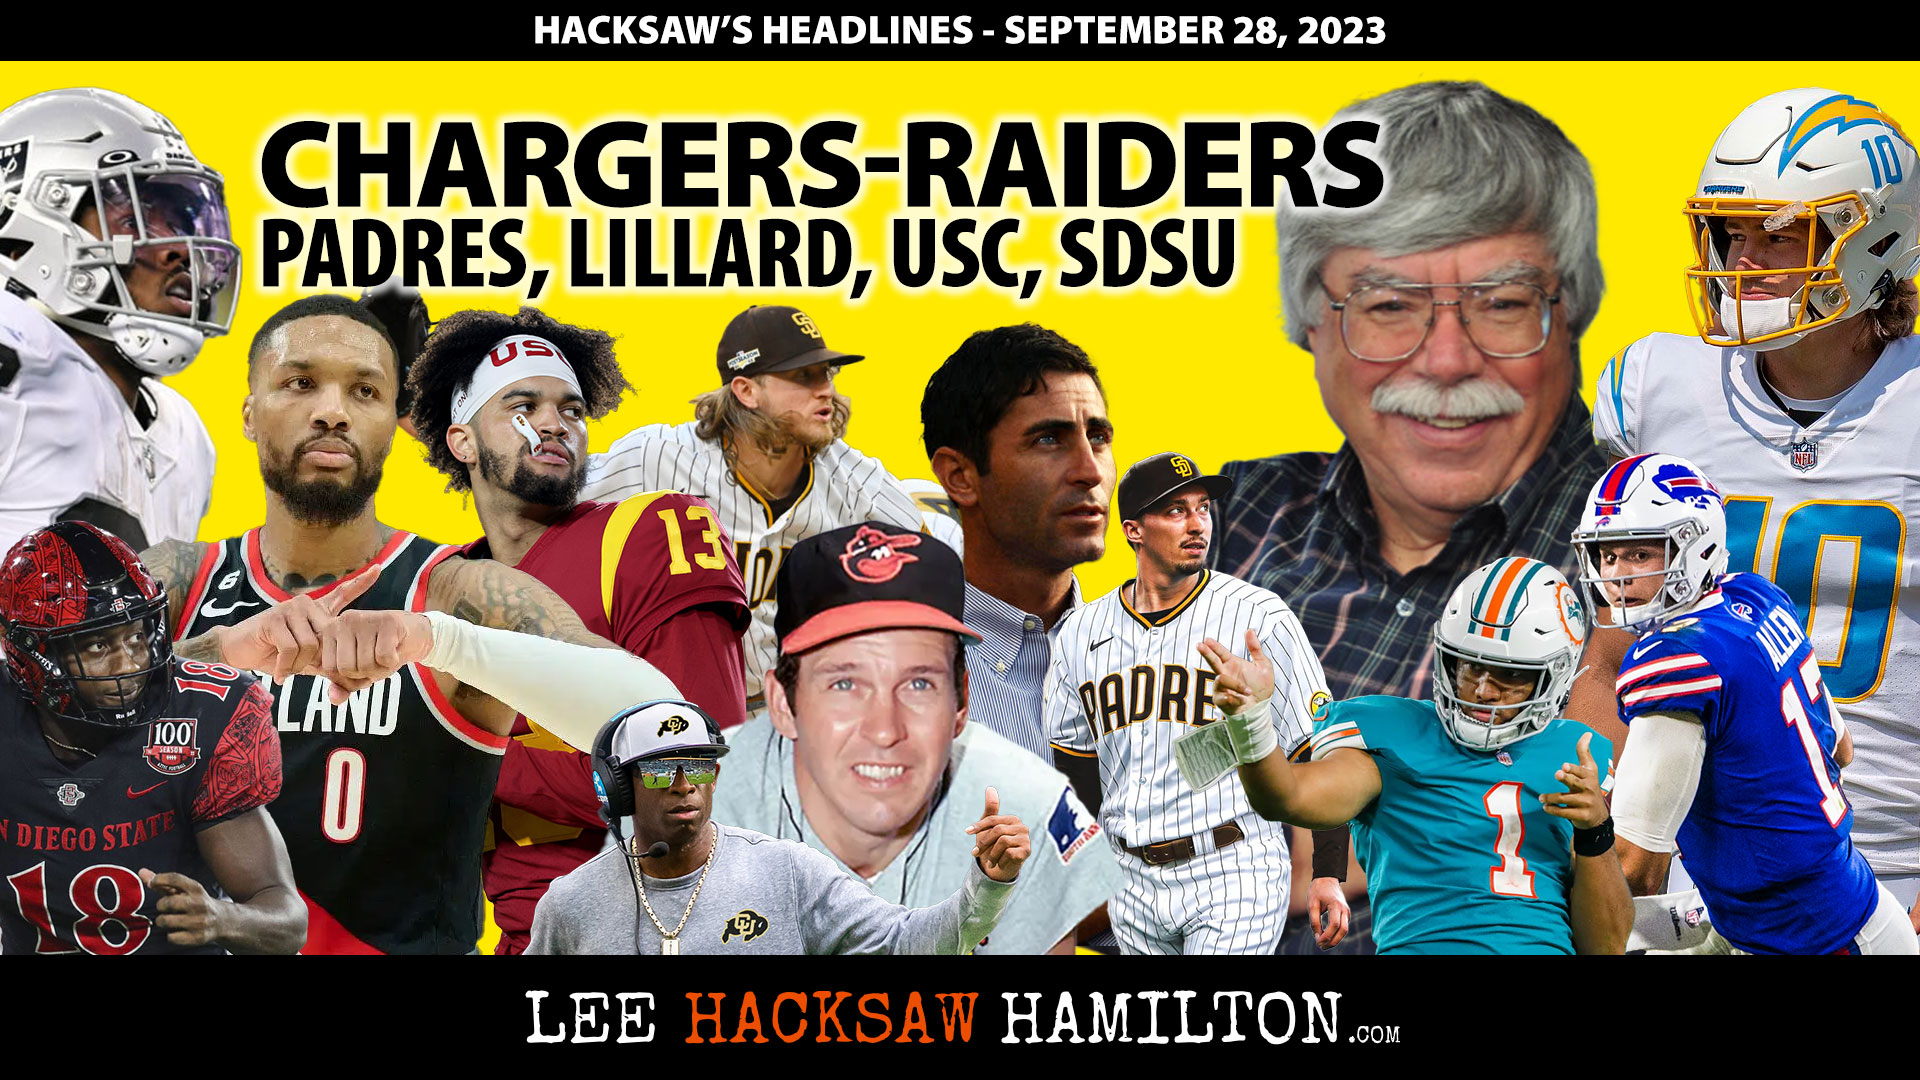 Lee Hacksaw Hamilton discusses Padres Decisions, Brooks Robinson, Lillard Trade, NFL Week #4, USC, San Diego State, Ryder Cup